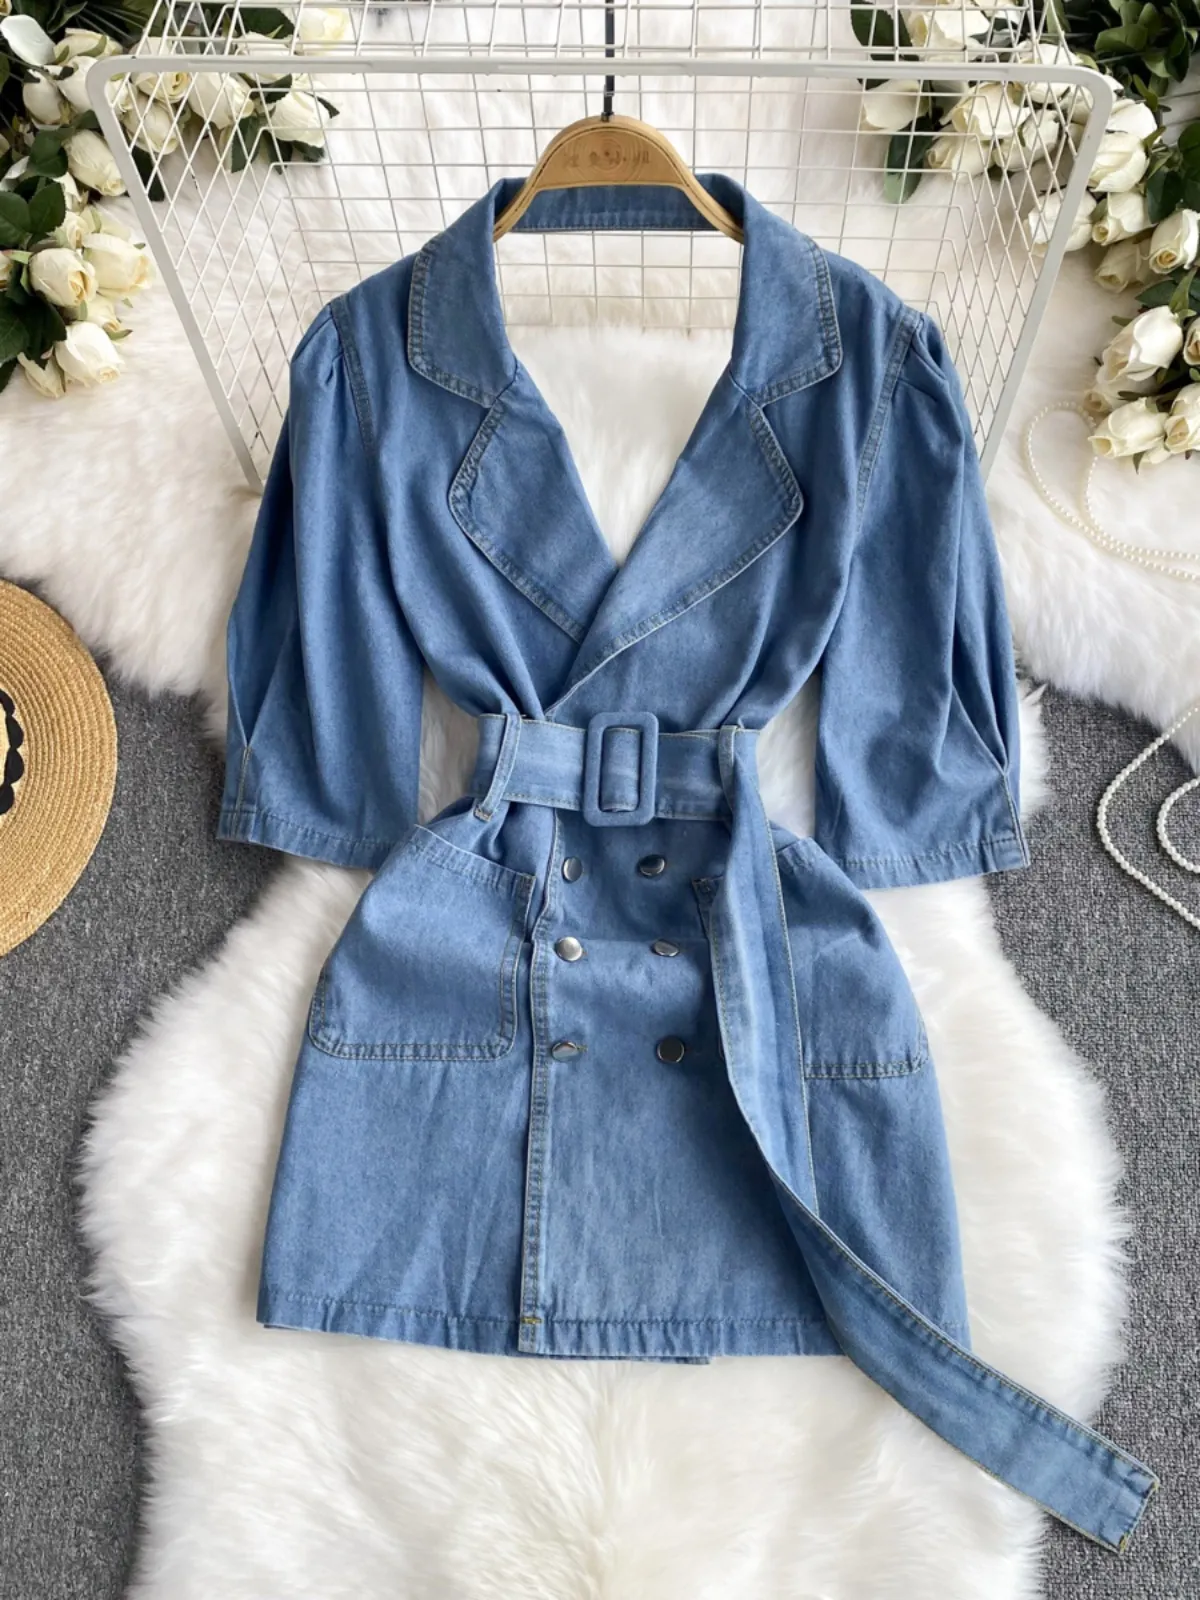 Korean version of fashionable retro scheming hollowed out backless denim dress for women with waist reduction and slimming effect, bubble sleeves for reducing age, short skirt